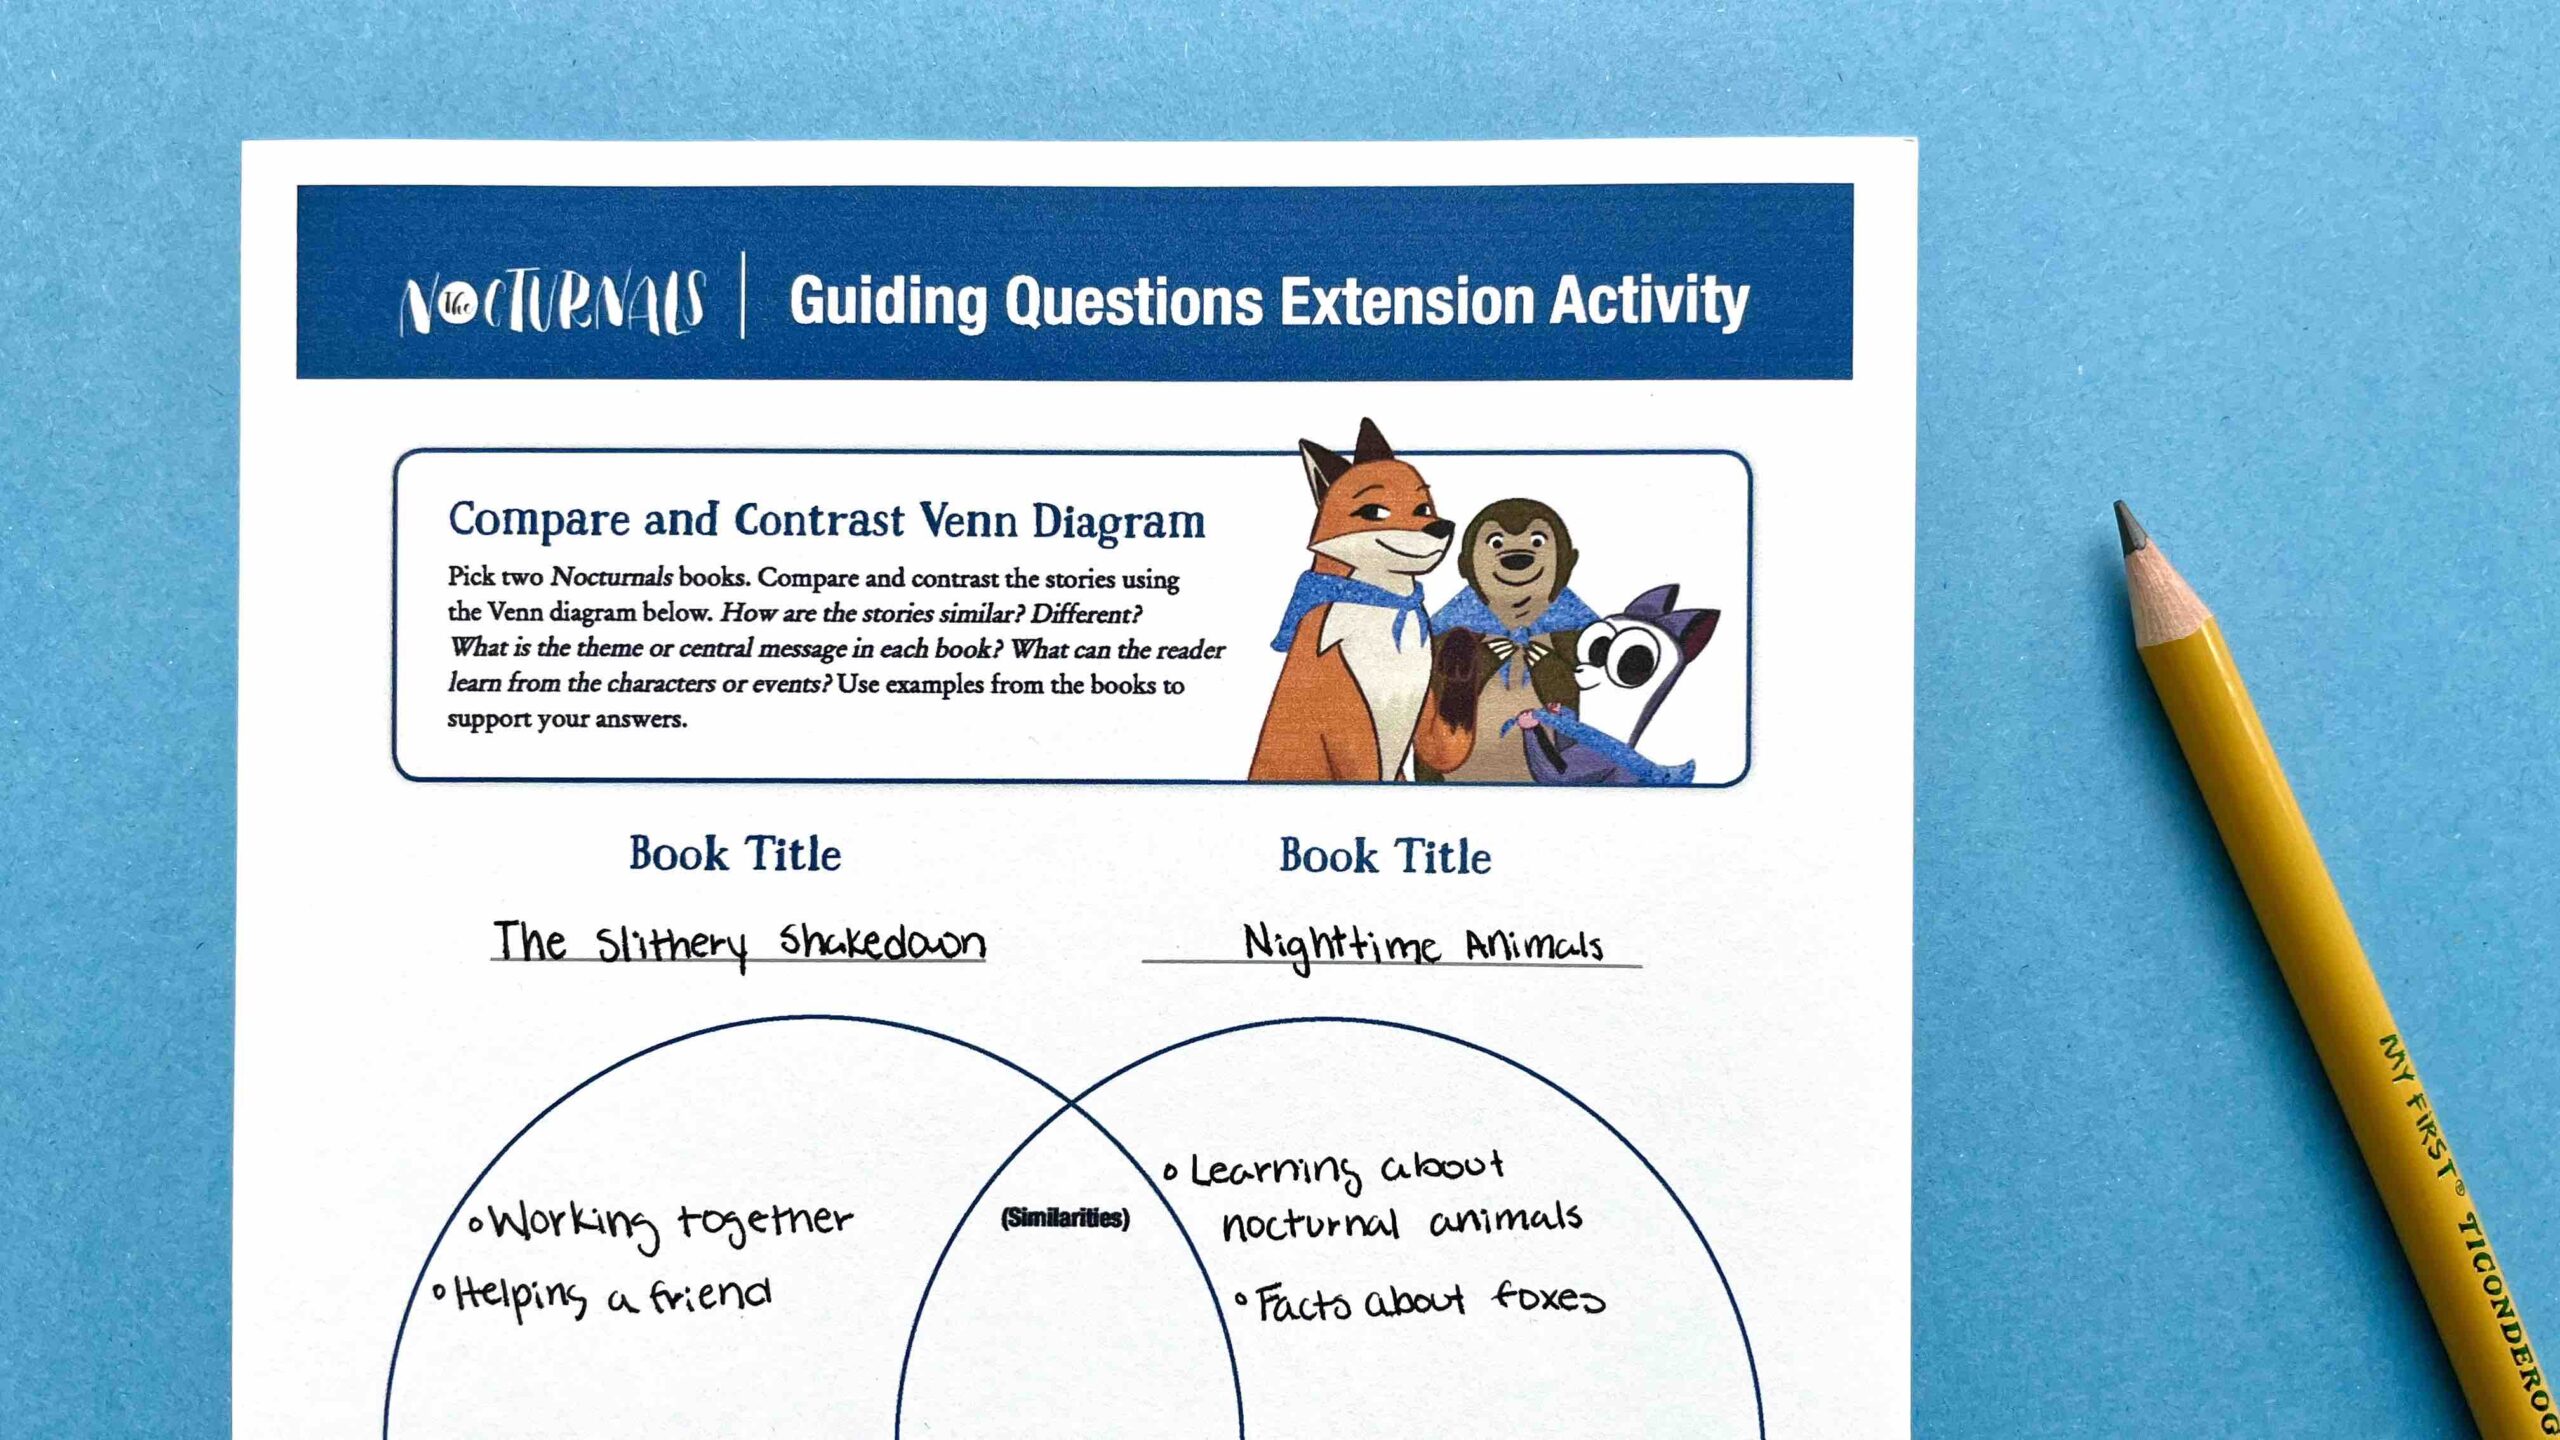 Guiding questions extension activity worksheet.